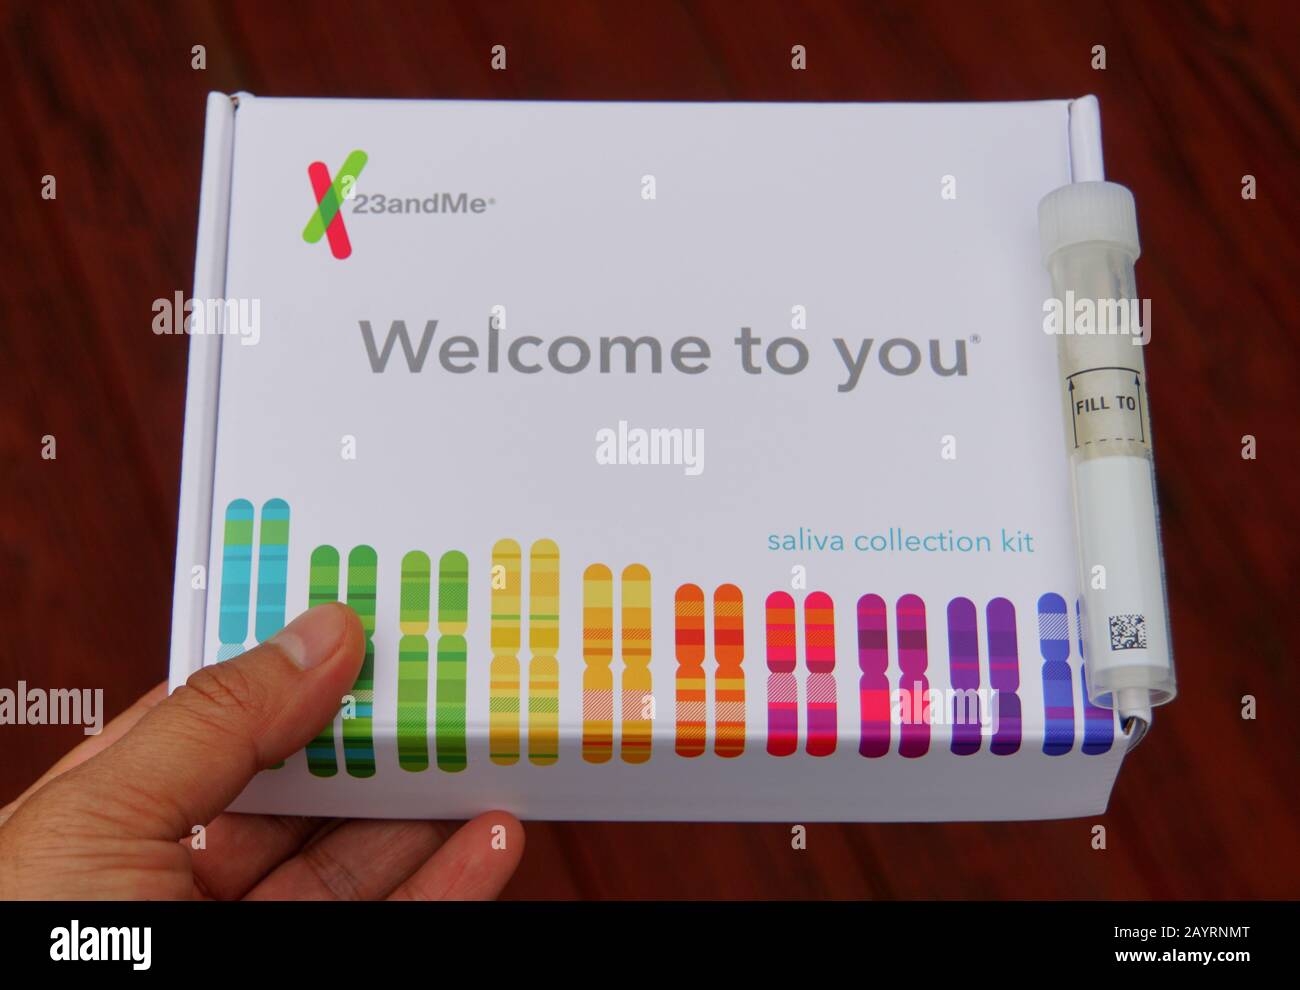 Wilmington, Delaware, U.S.A - March 10, 2019 - Saliva collection kits by 23andMe for ancestry testing and family tree discovery Stock Photo